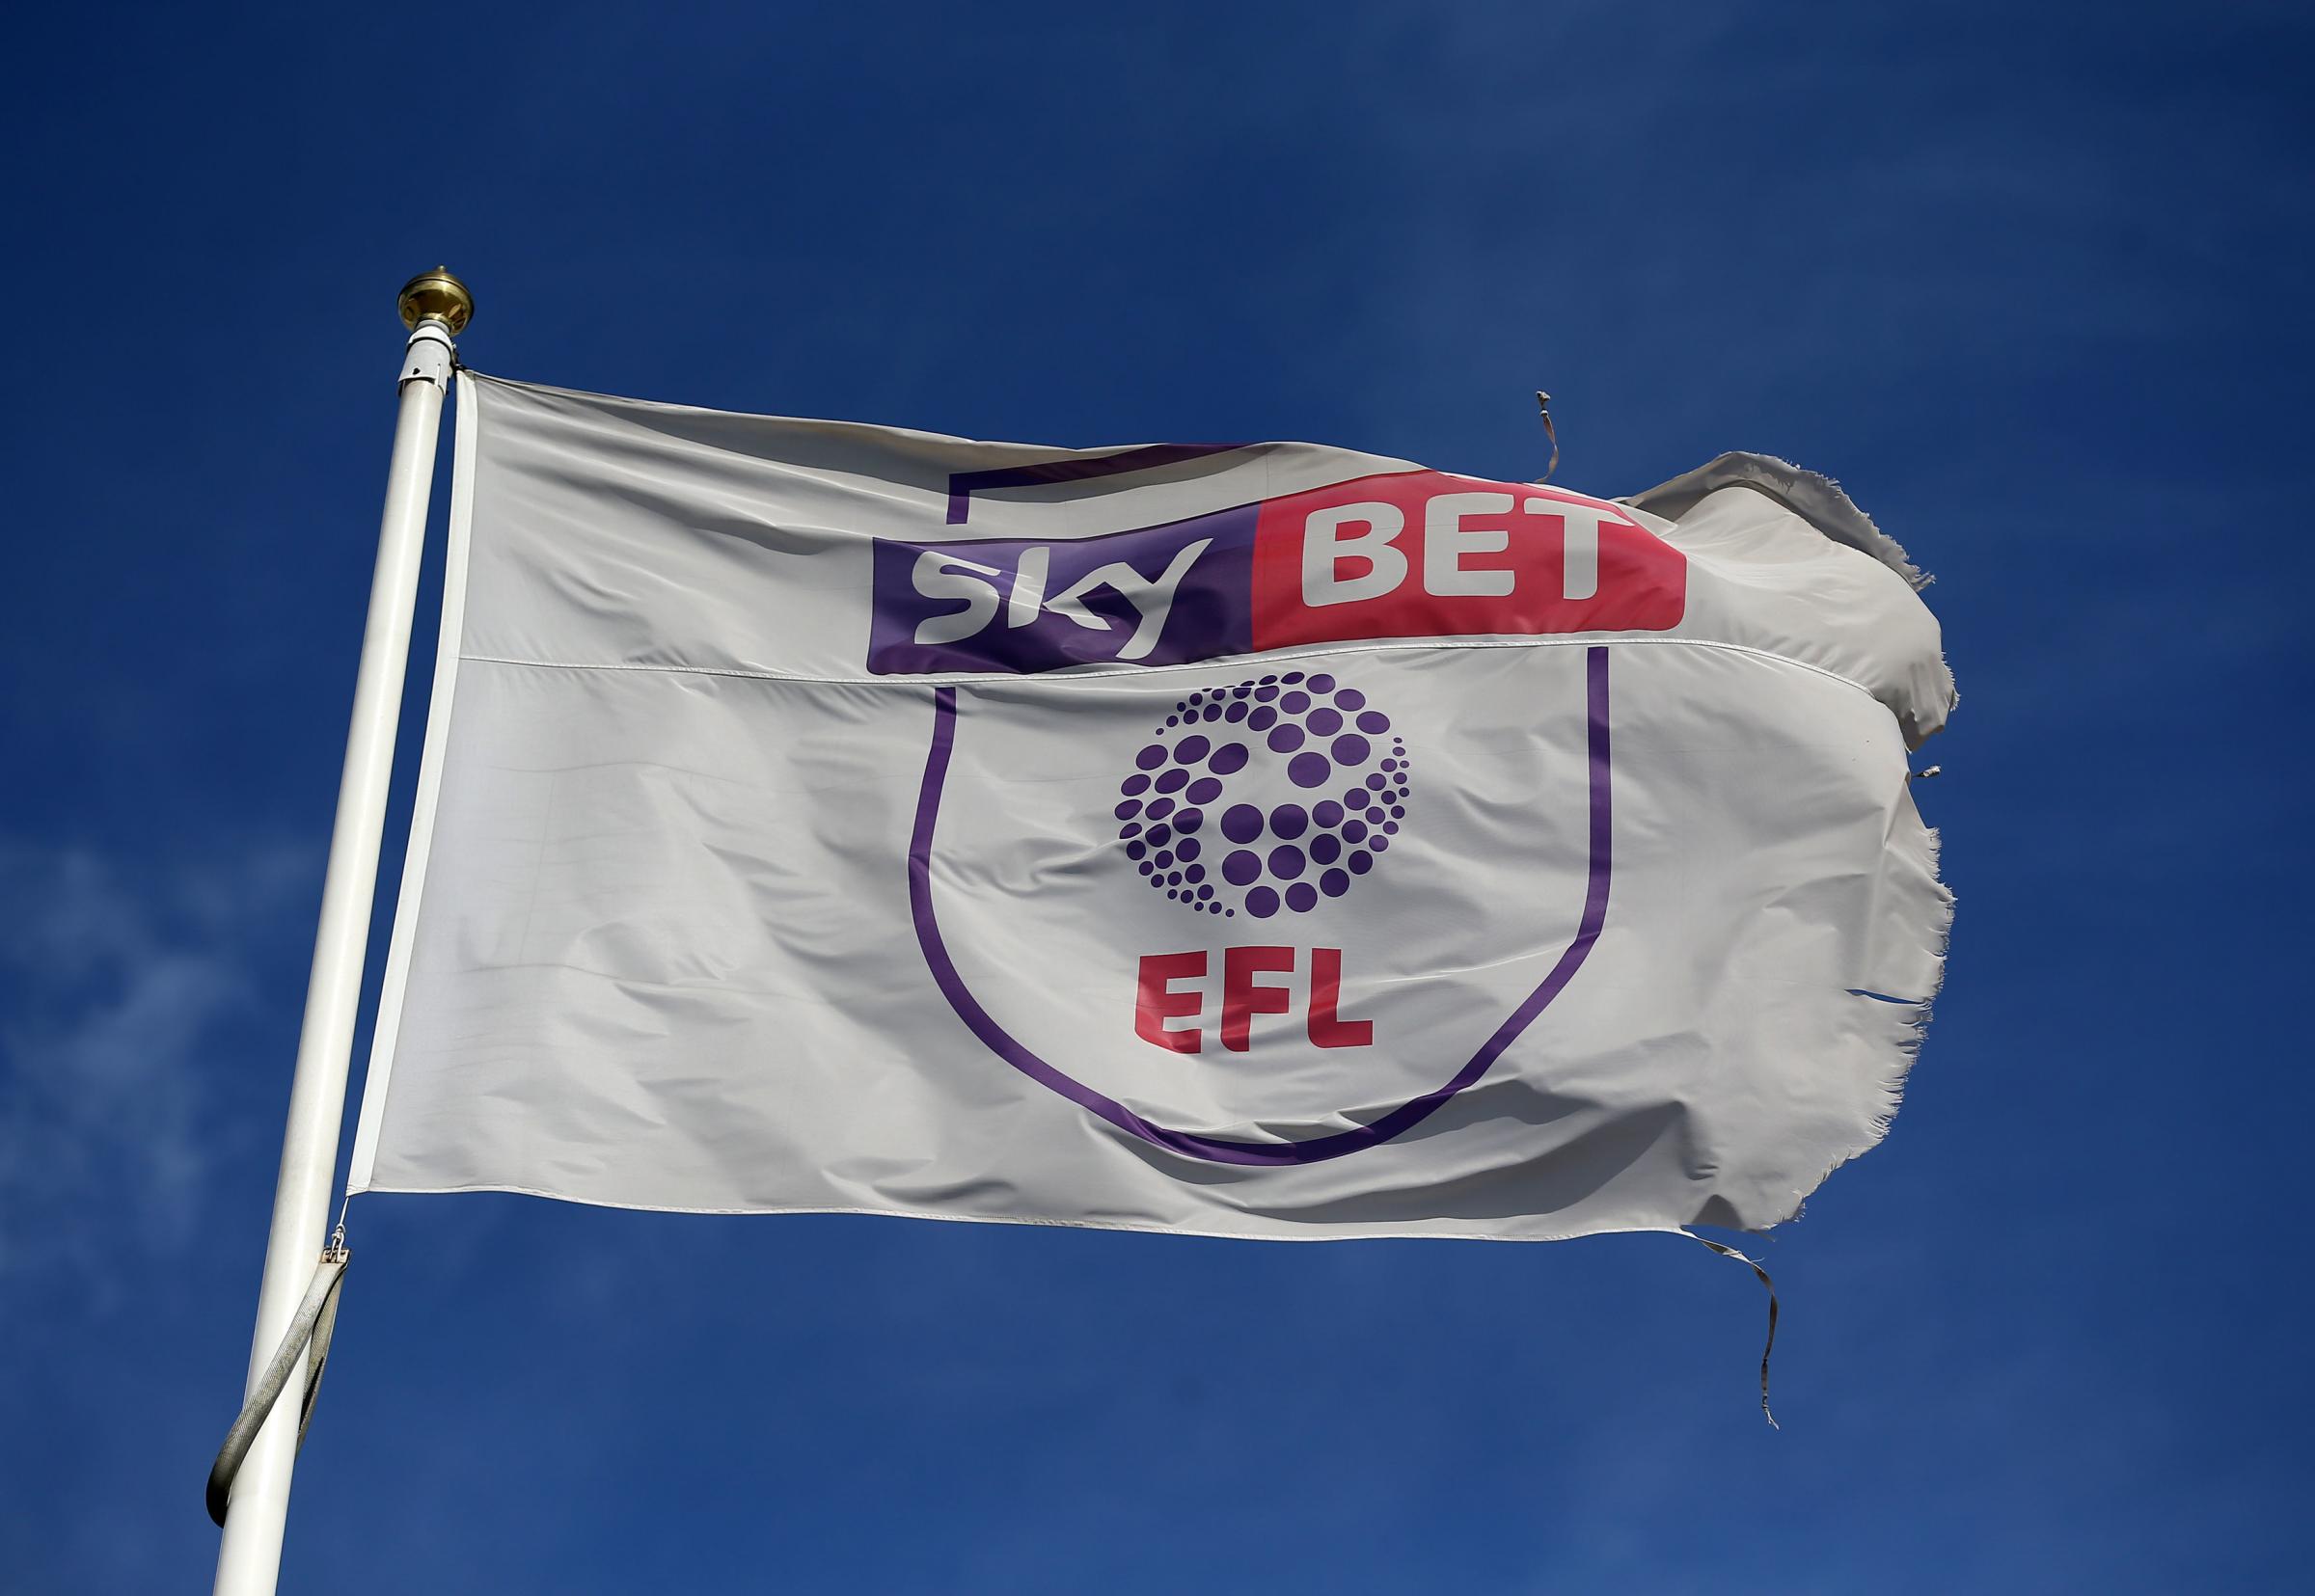 Several EFL clubs are taking part in the scheme